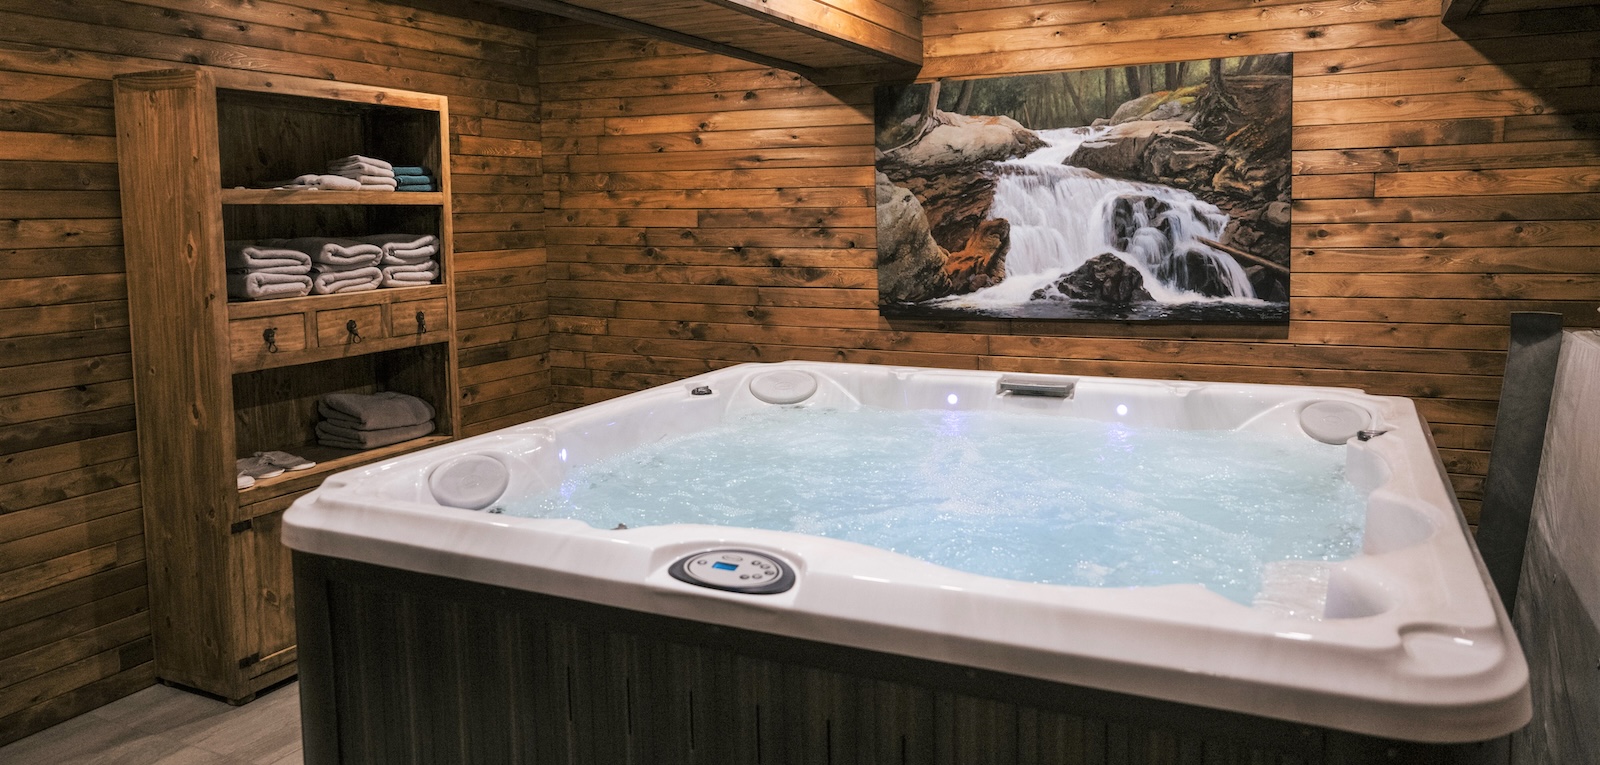 Relaxation - Private hot tub